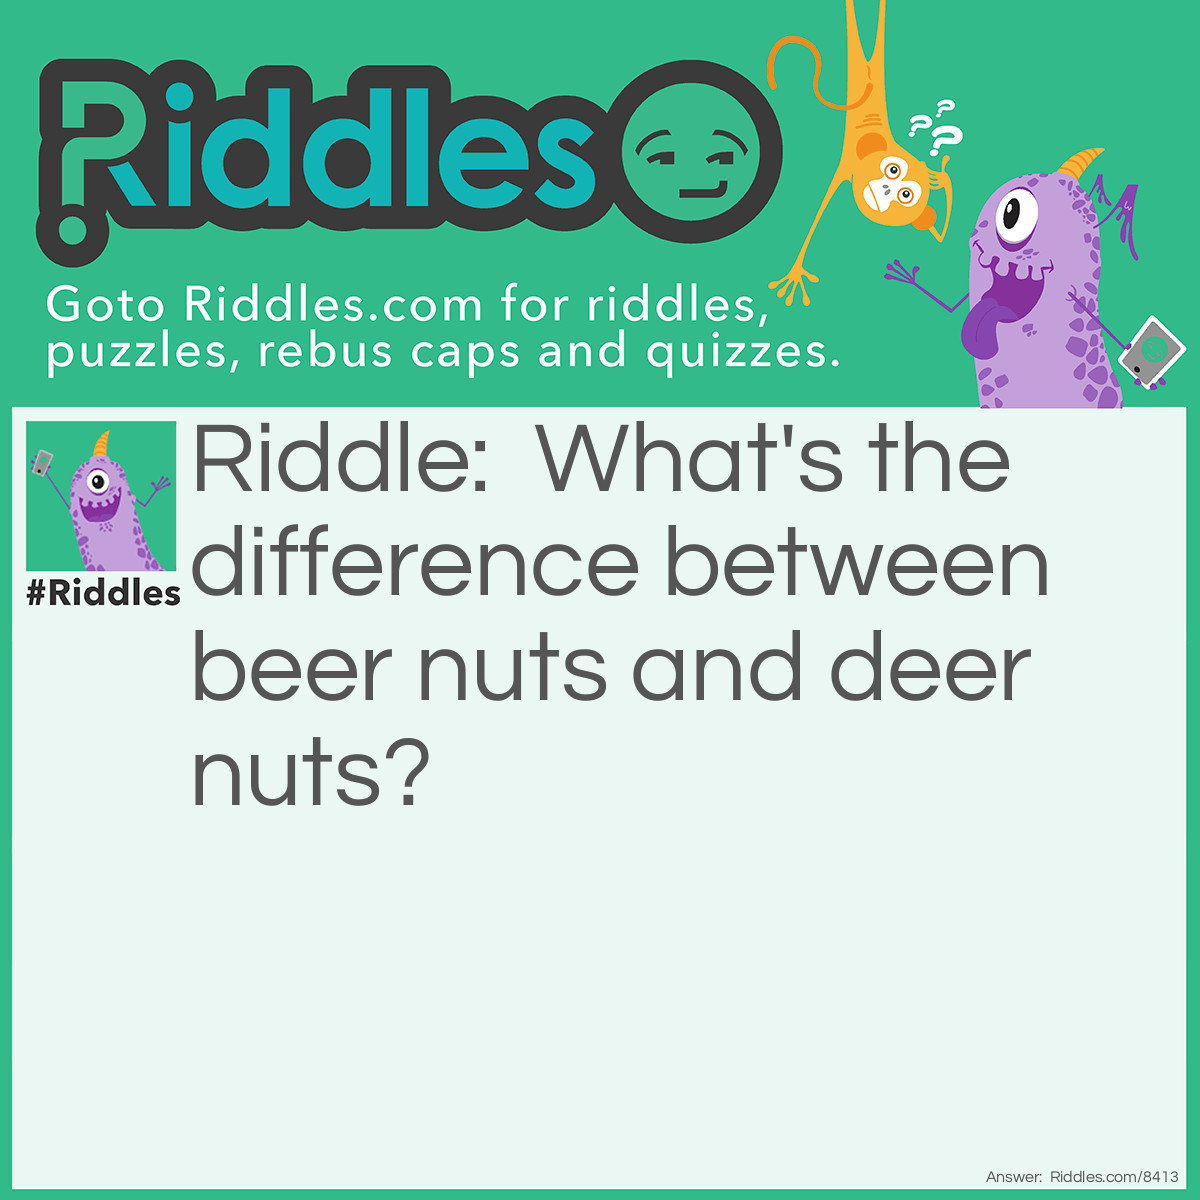 Riddle: What's the difference between beer nuts and deer nuts? Answer: Beer nuts cost around $1.50 -- deer nuts are under a buck.